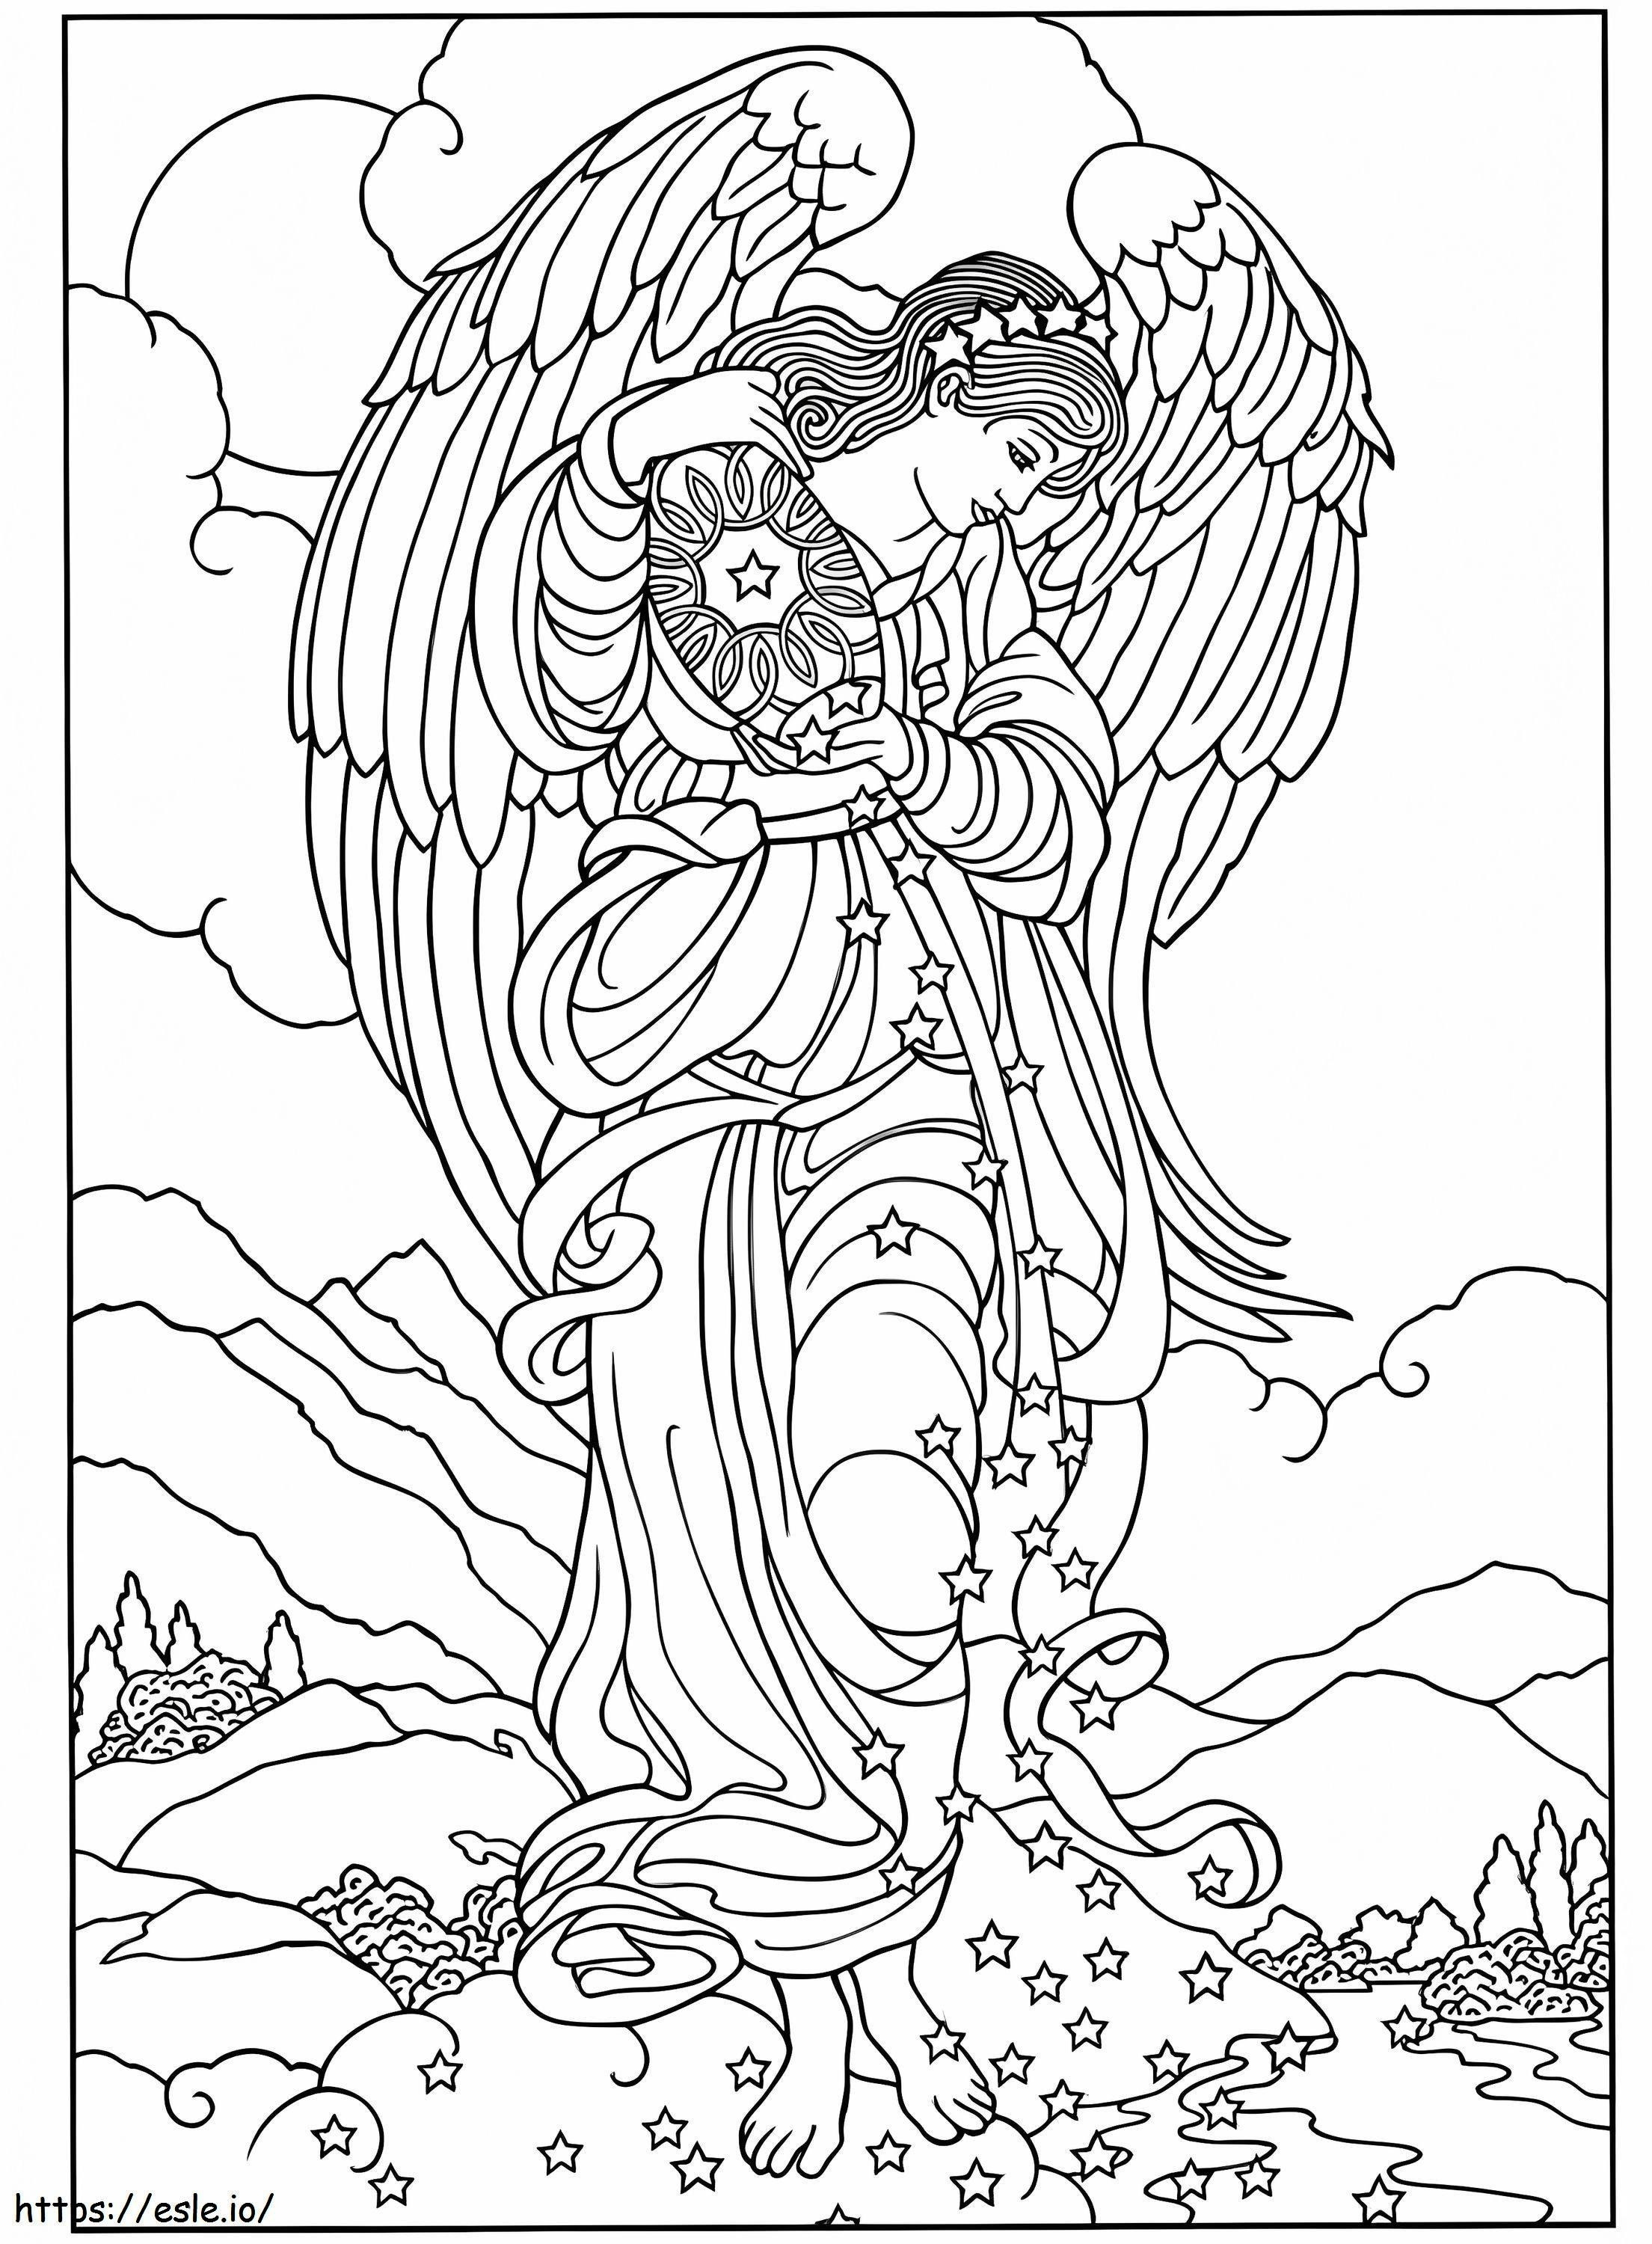 Angel Is For Adults coloring page